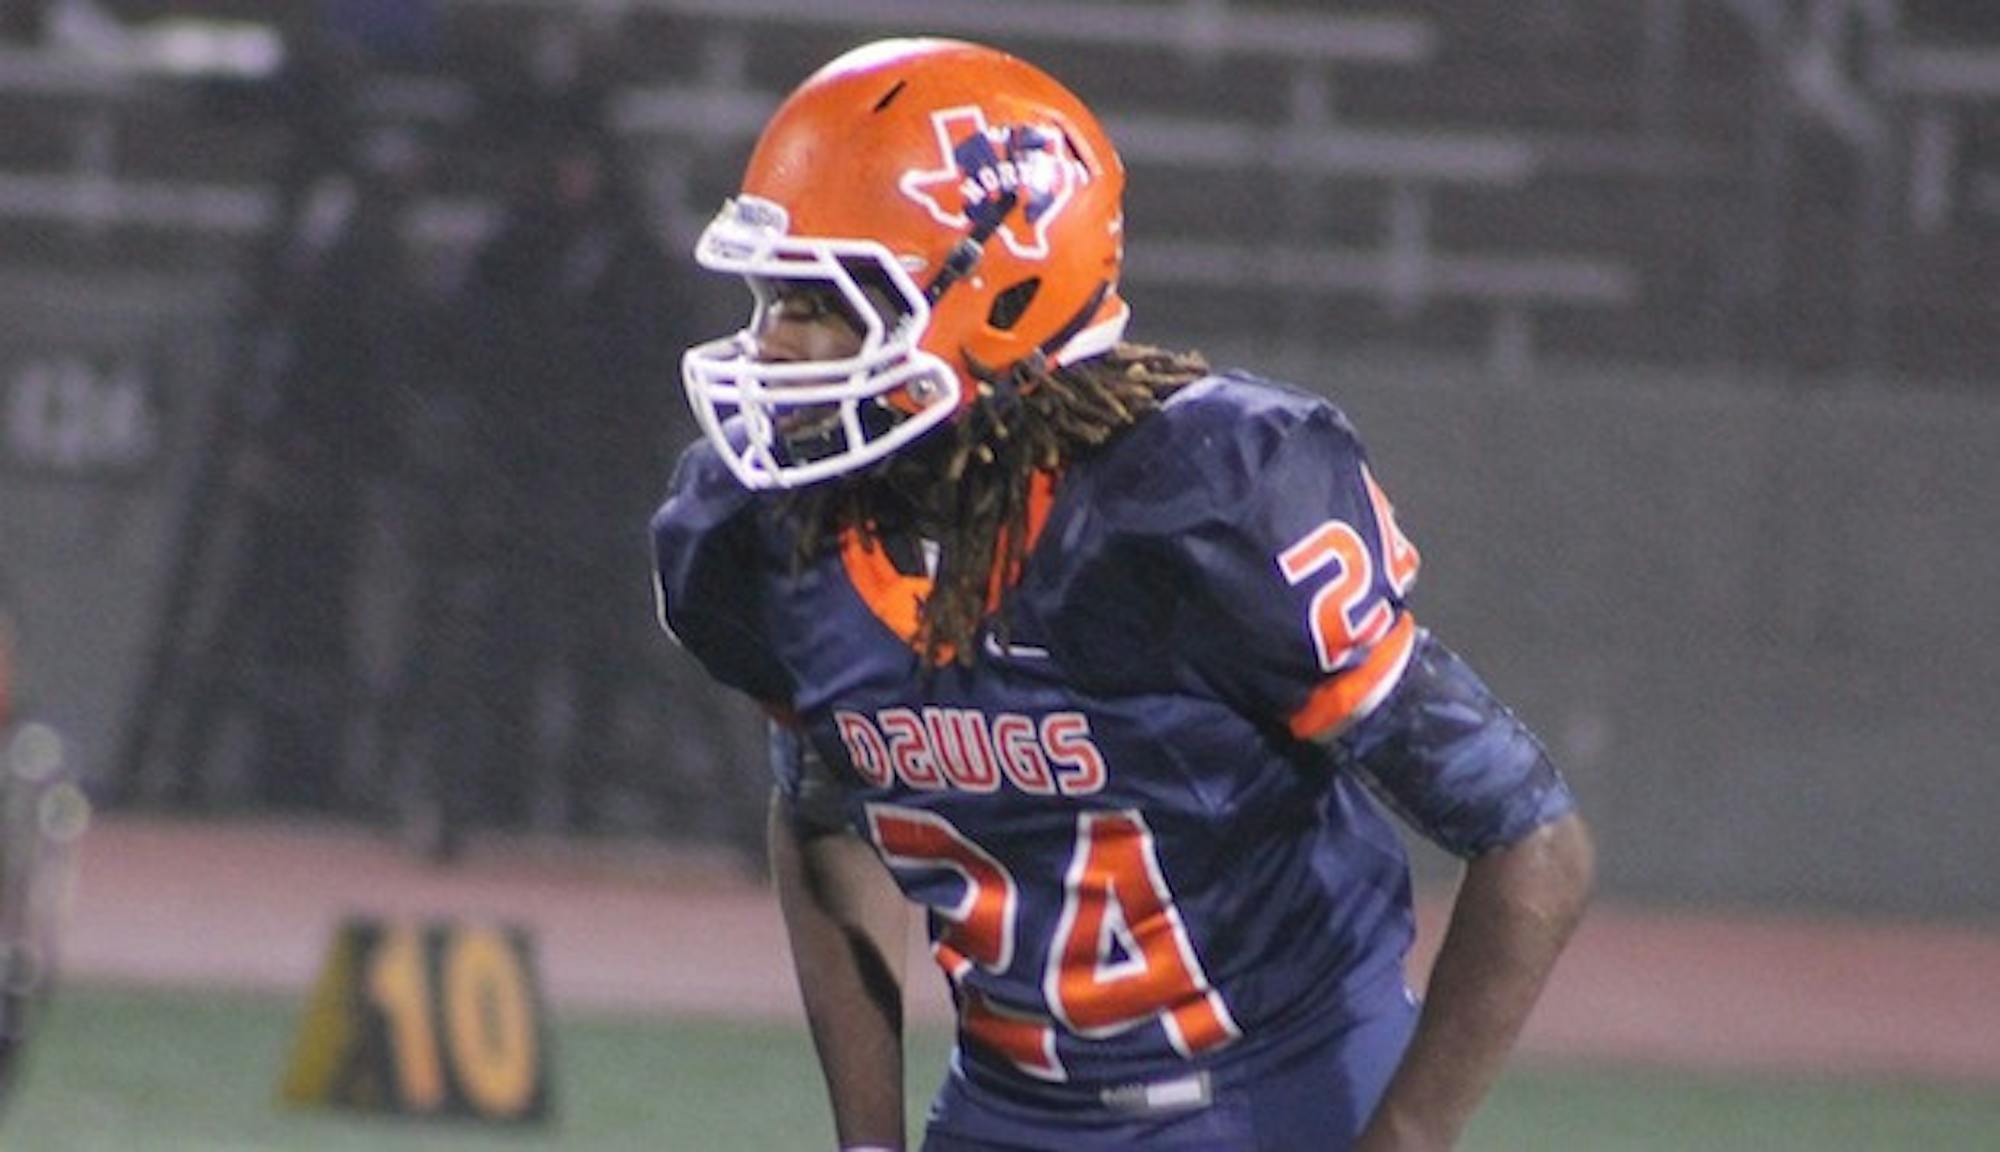 Class of 2015 running back Ronald Jones II, an Oklahoma State commitment since April, is expected to visit Notre Dame next weekend when the Irish host Louisville on Senior Day, according to Irish recruiting analyst Tom Loy.